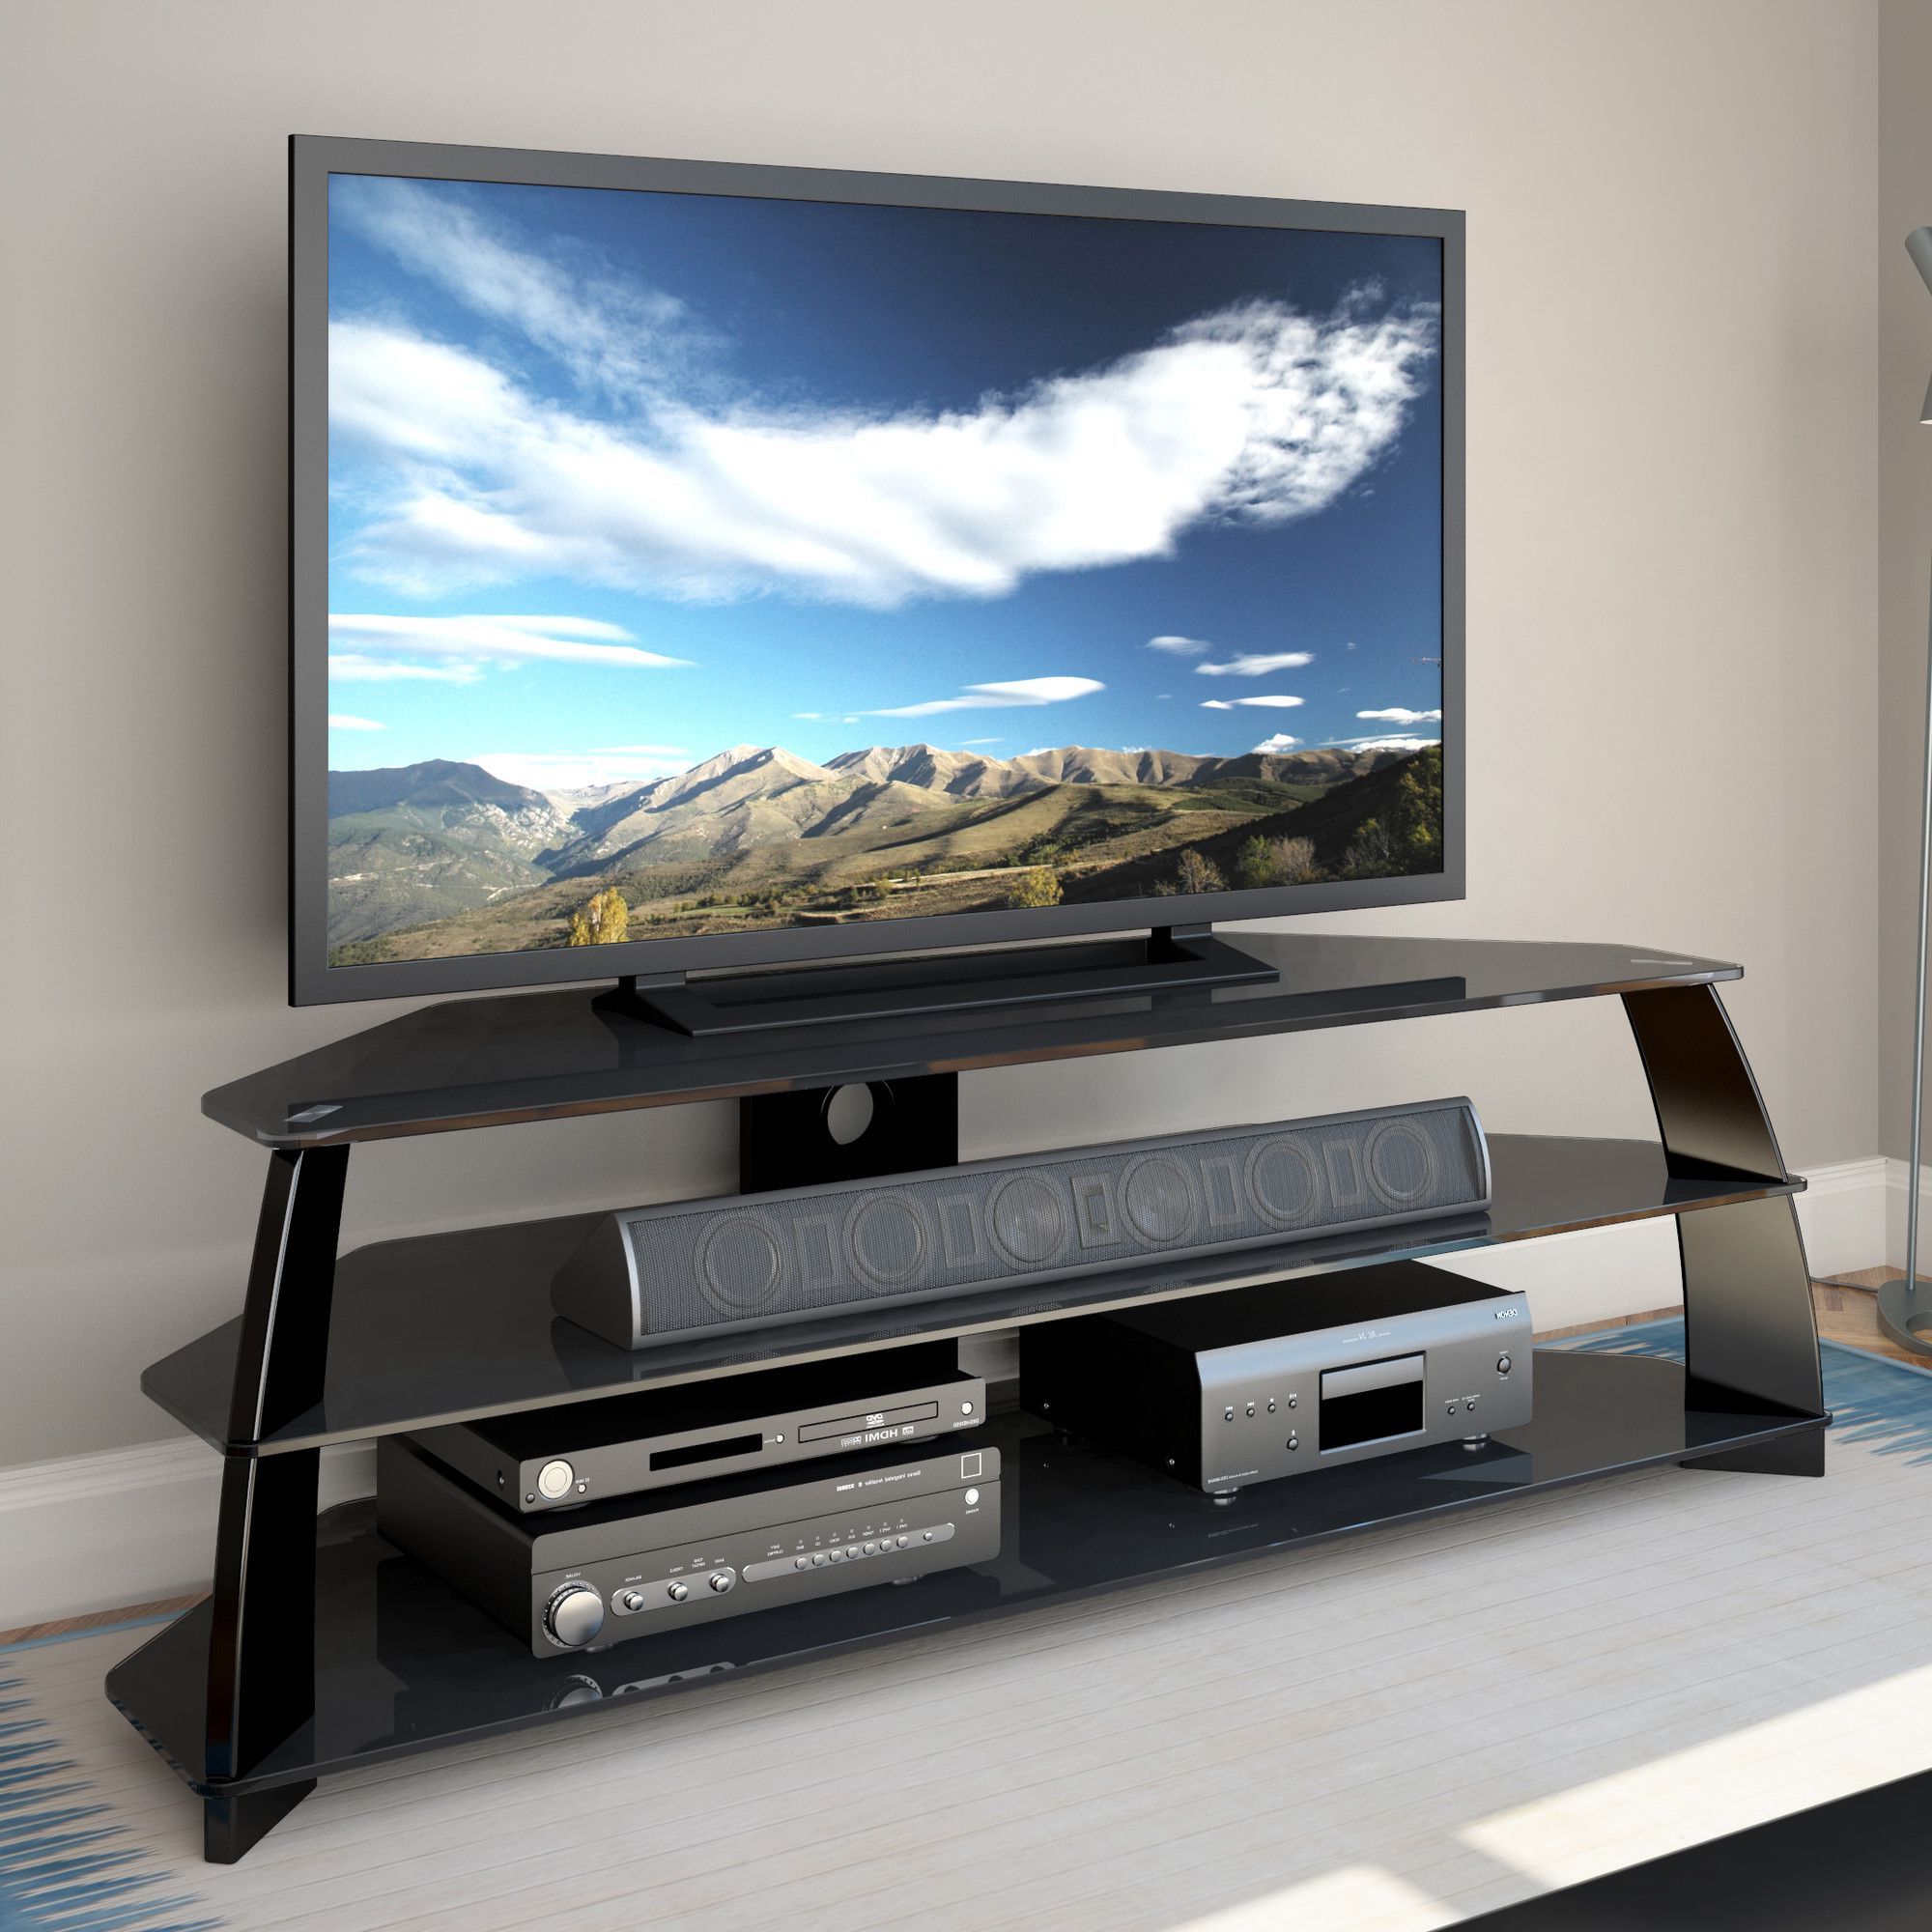 Online Home Store For Furniture, Decor, Outdoors & More Within Valenti Tv Stands For Tvs Up To 65" (Gallery 8 of 20)